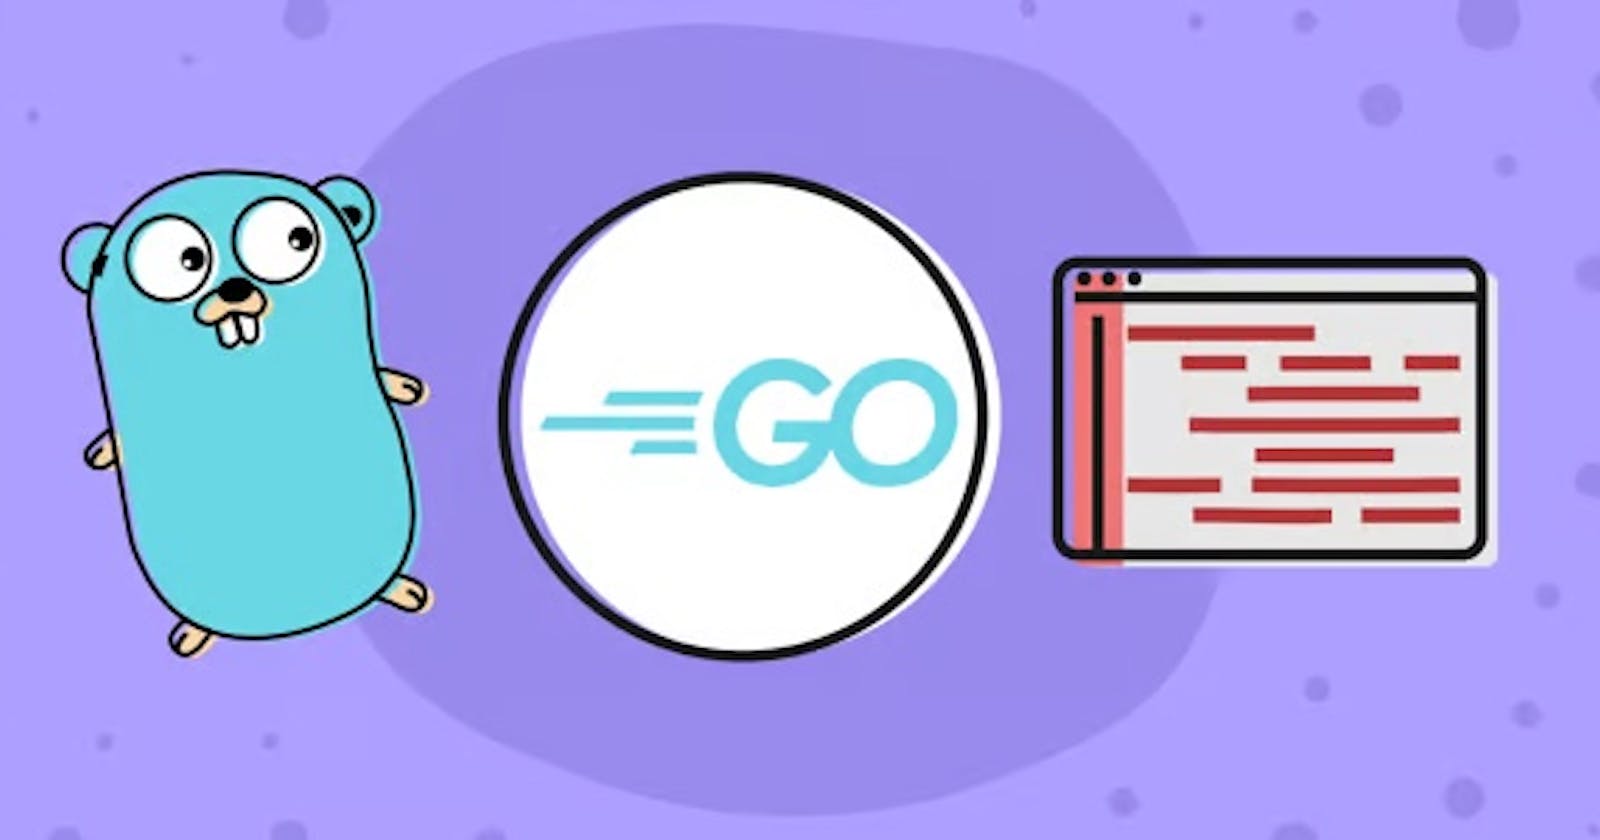 Getting Started with Golang: Build a simple music application